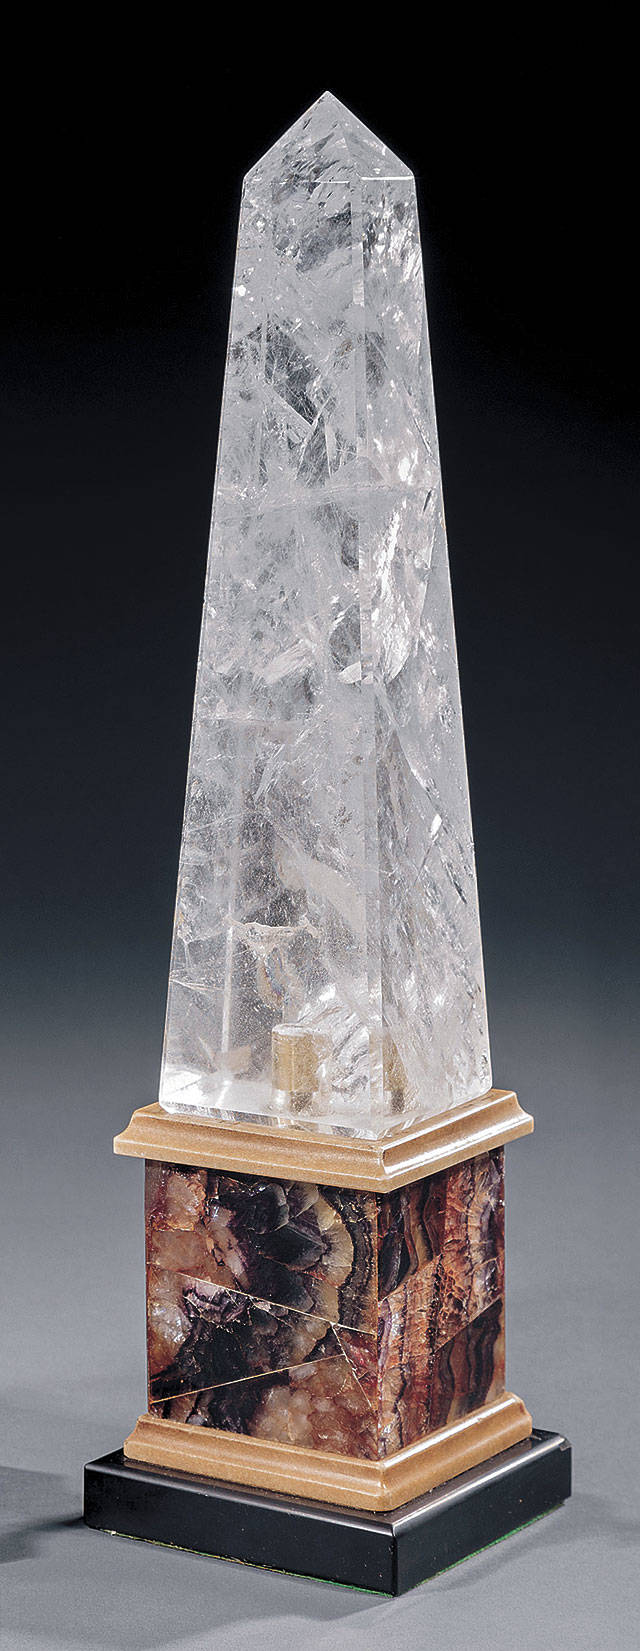 A pair of 15-inch high obelisks made of rare Blue John stone and rock crystal — only one is shown here — sold at a Neal Auction in New Orleans for $2,176. (Cowles Syndicate Inc.)